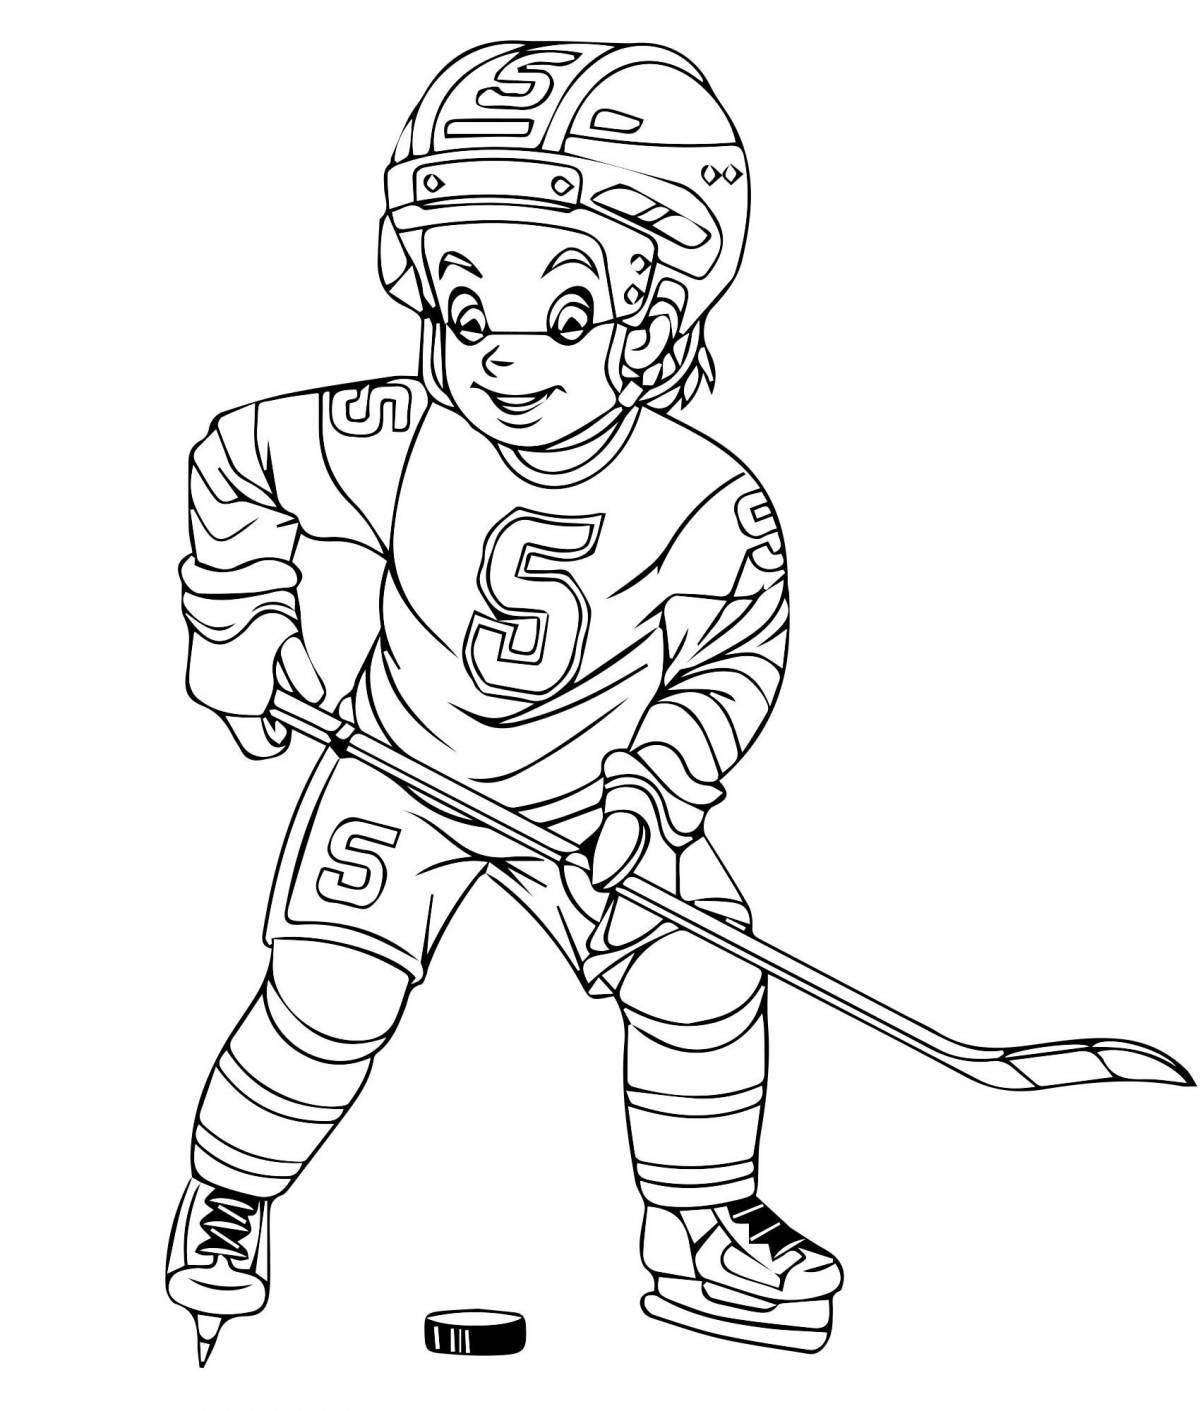 Gorgeous ovechkin coloring book